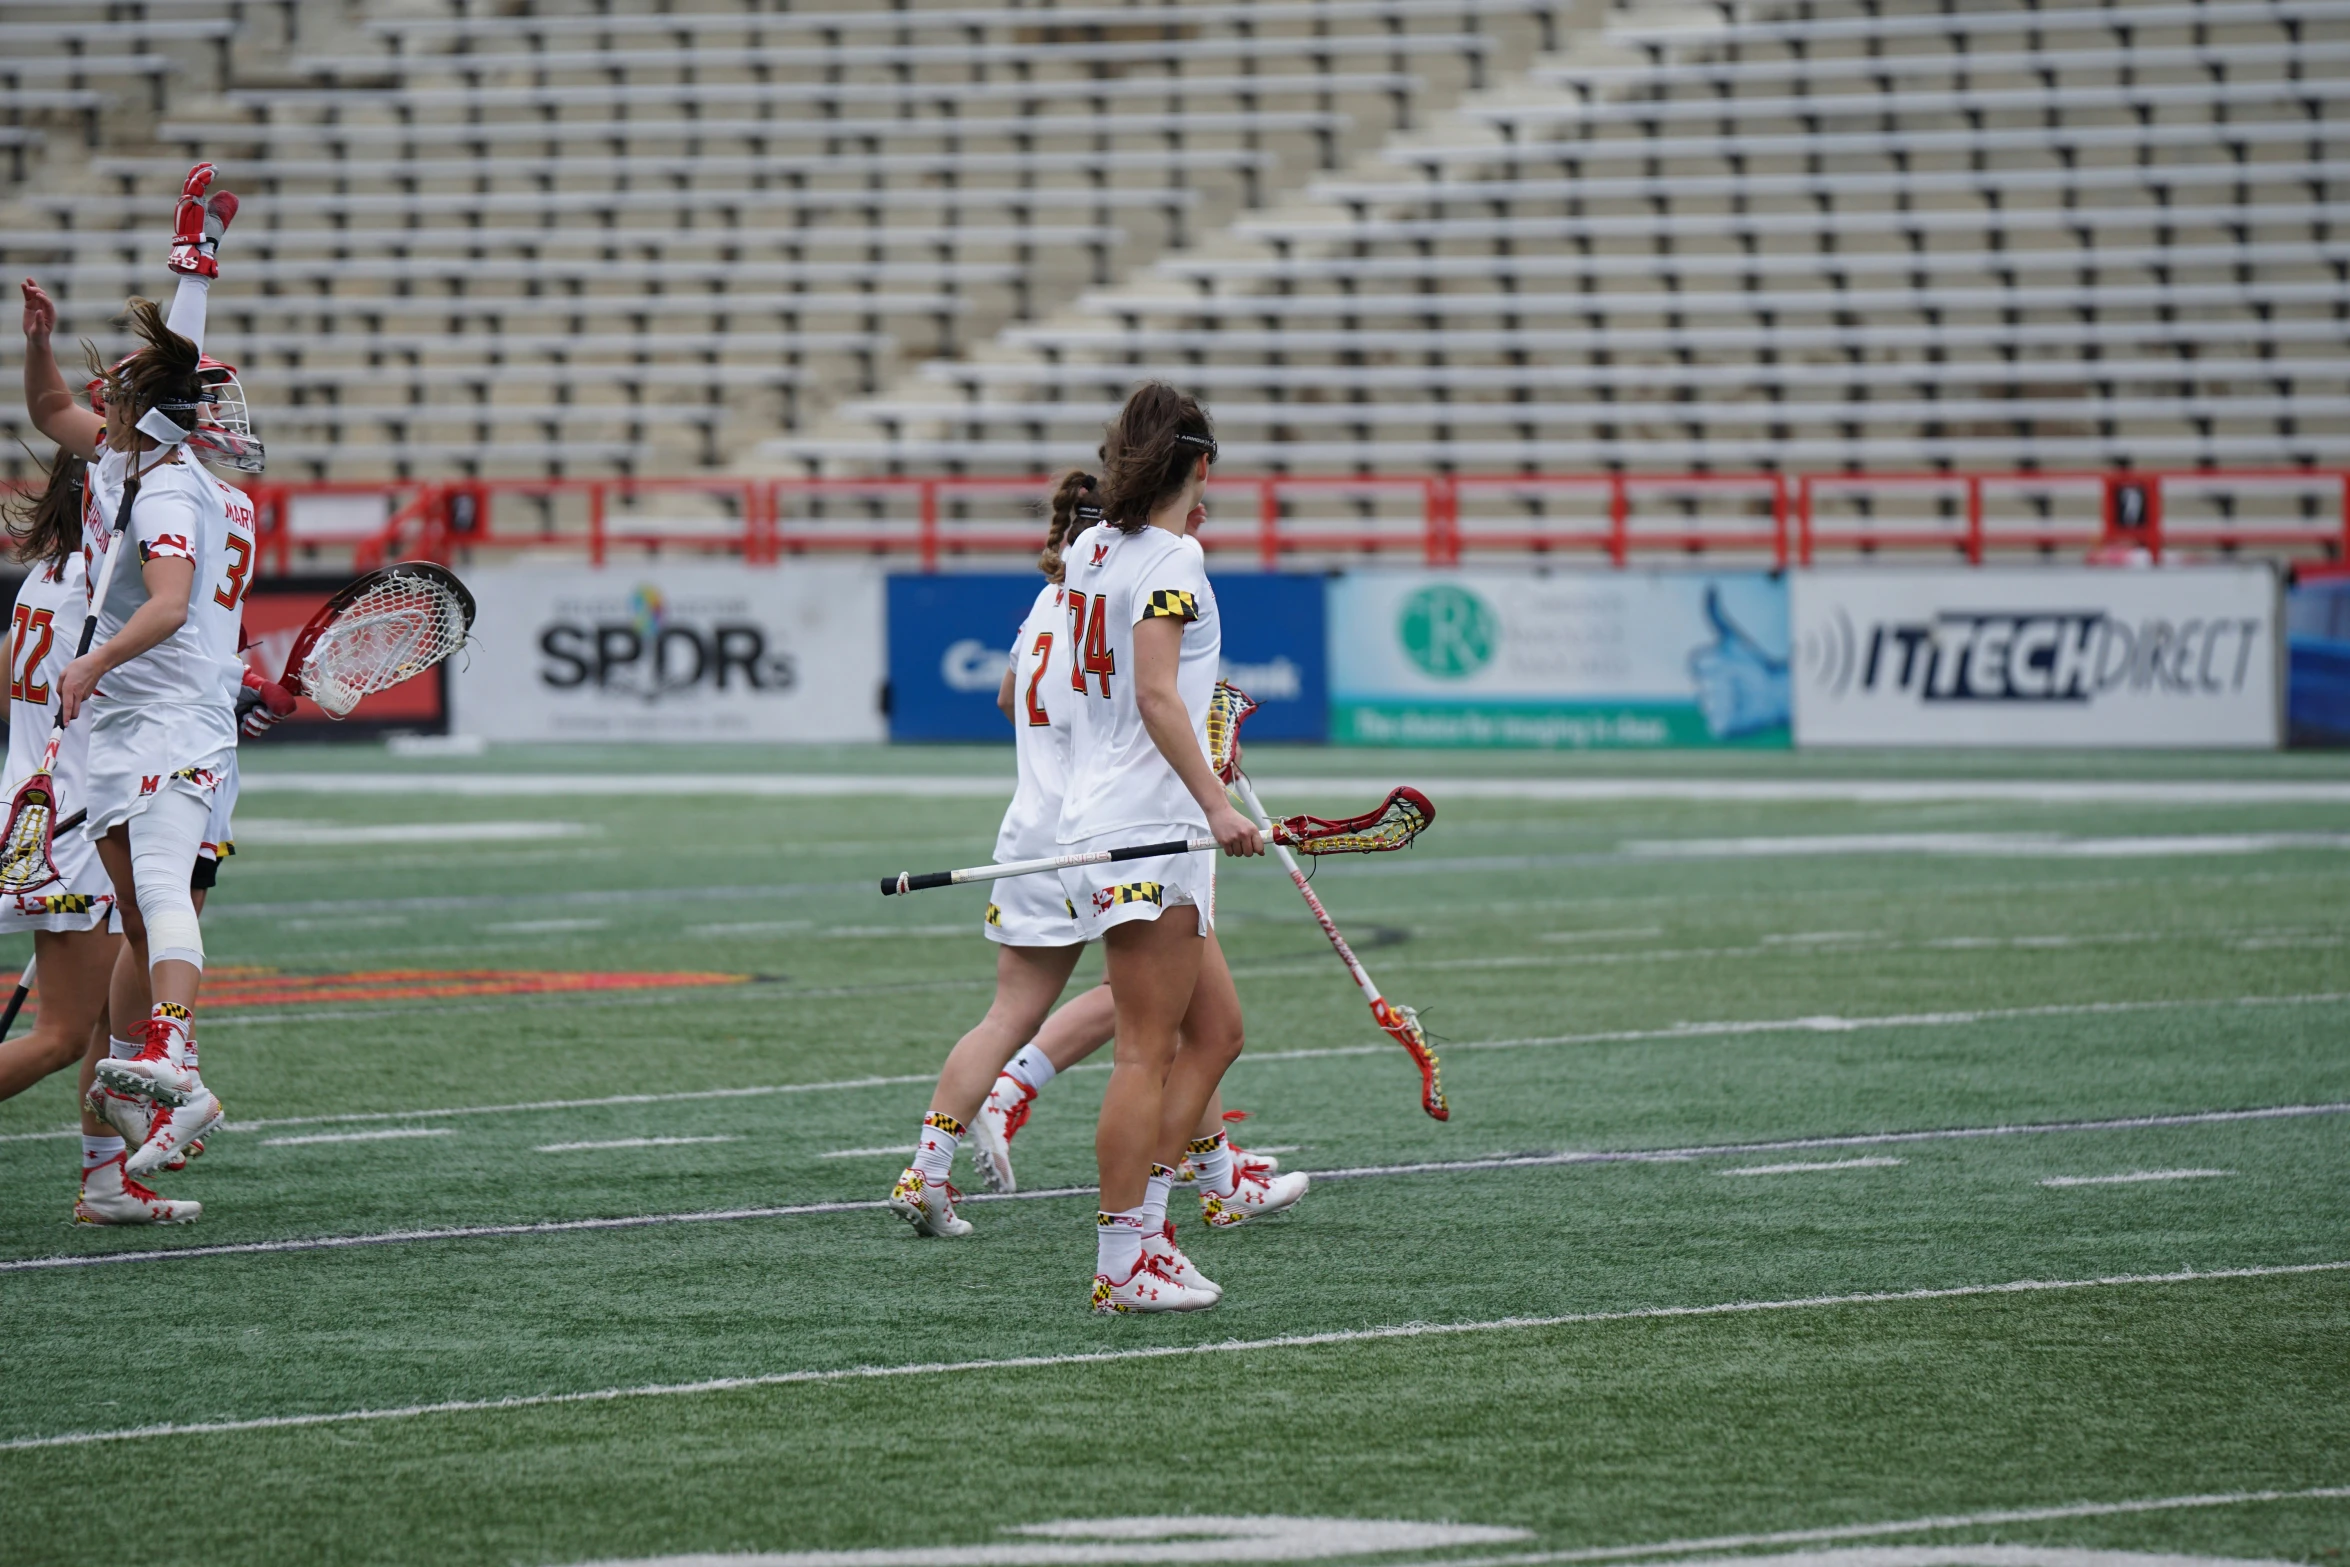 several girls playing lacrosse on a field, in a stadium